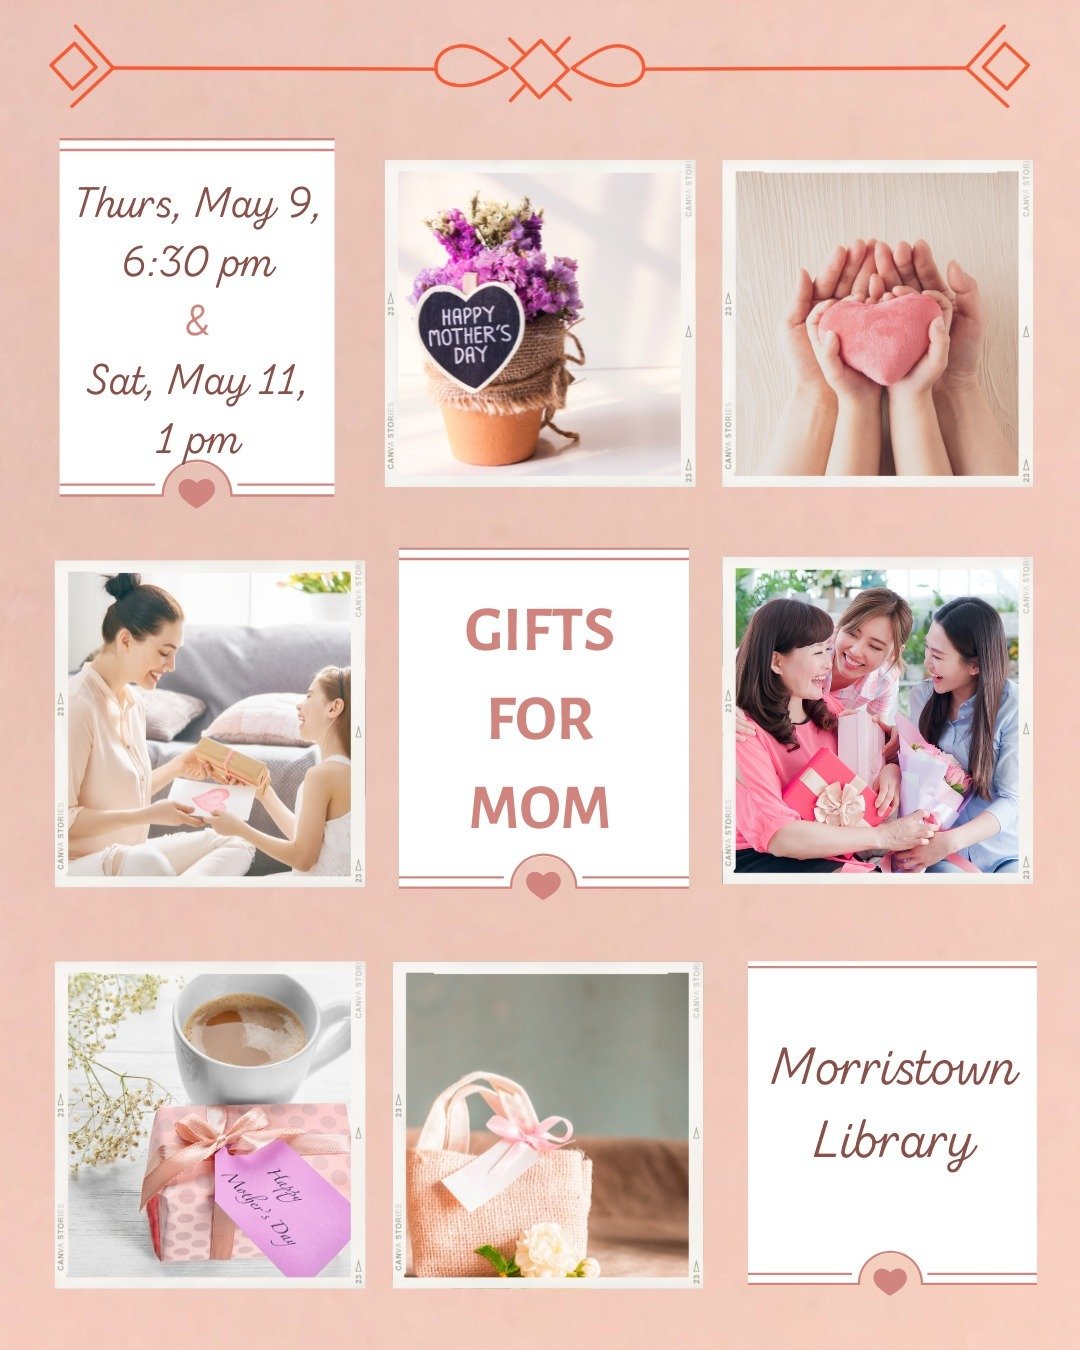 Velma Wortman Morristown Branch - Shelby County Public Library @morristownlibrary Thursday May 9th and Saturday May 11th. Gifts For Mom! 
Mother's Day is just around the corner and its time to create something for the Mama Bear in your life at this F